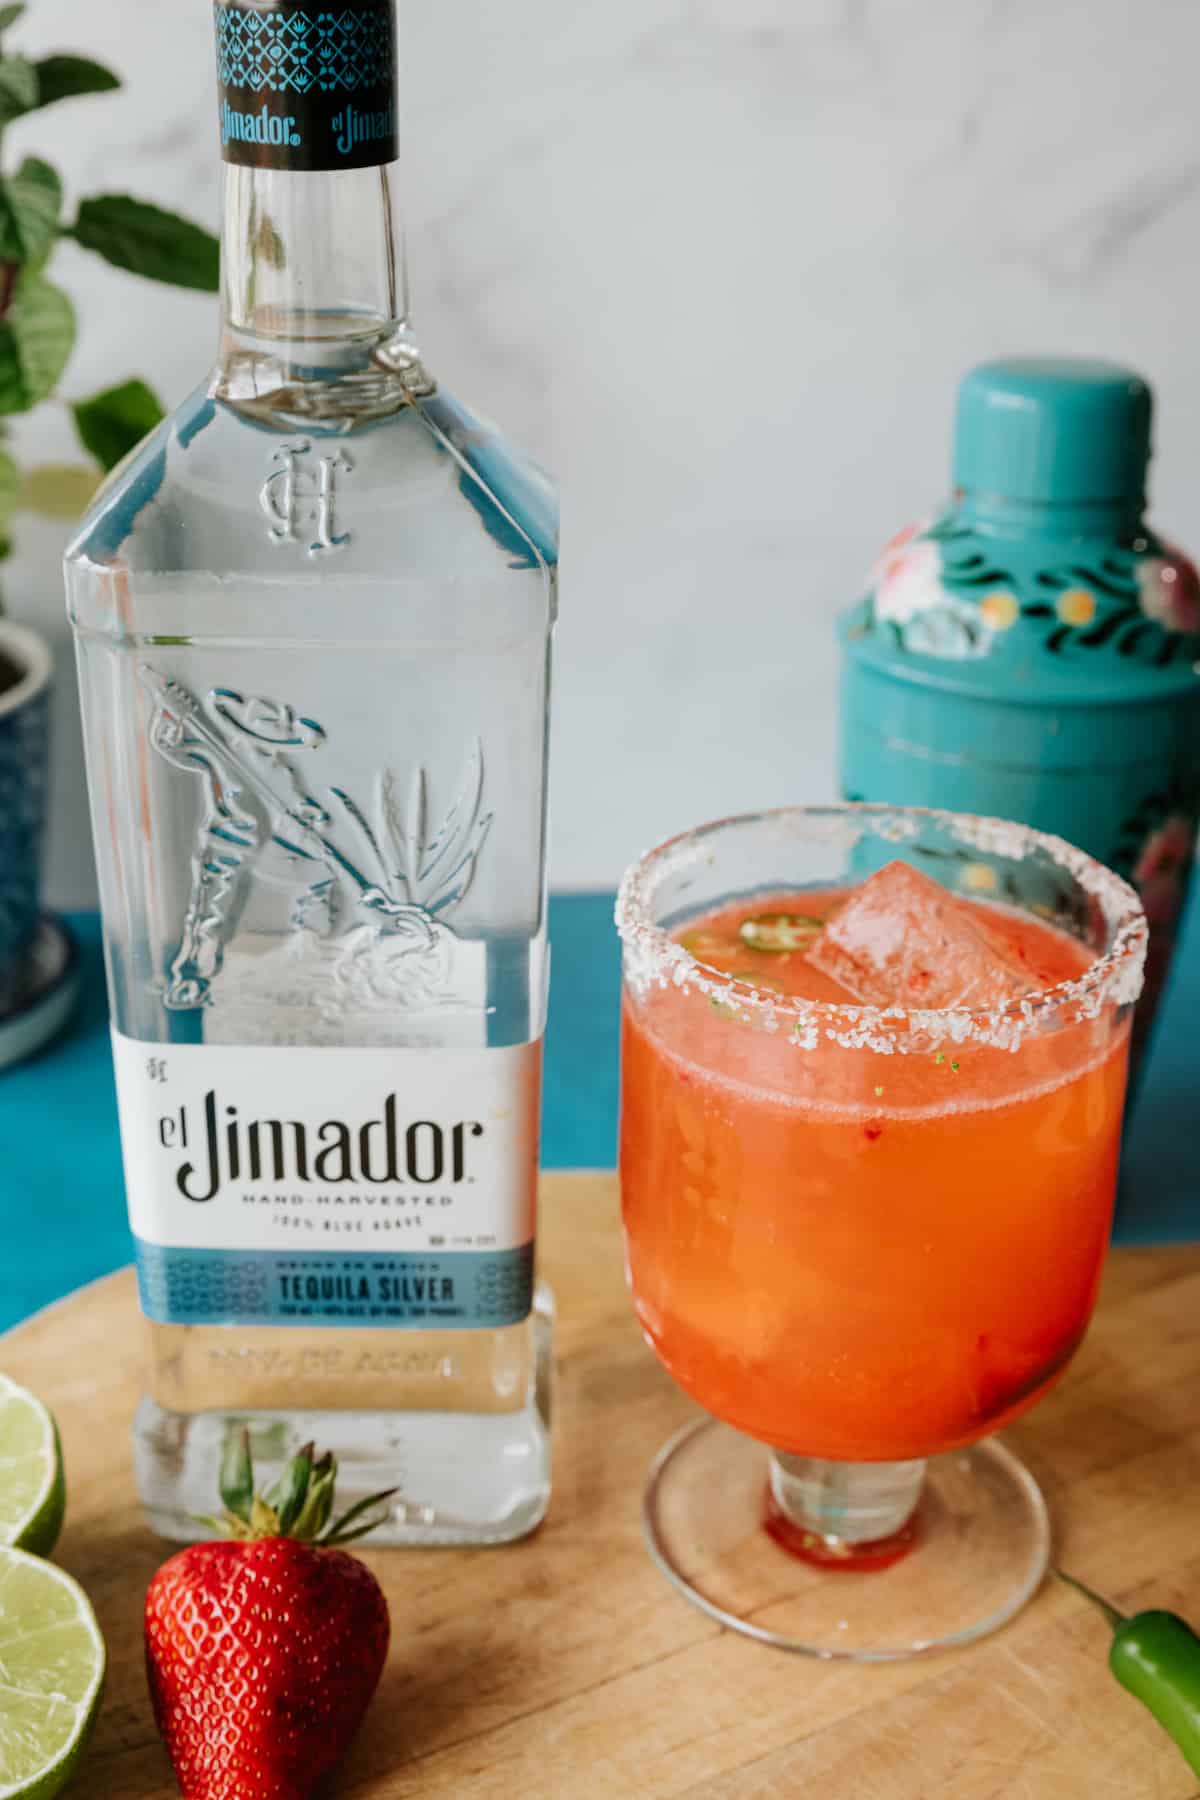 Strawberry jalapeño margarita in a clear footed glass with a salt and lime zest rim next to a bottle of el jimador tequila silver.